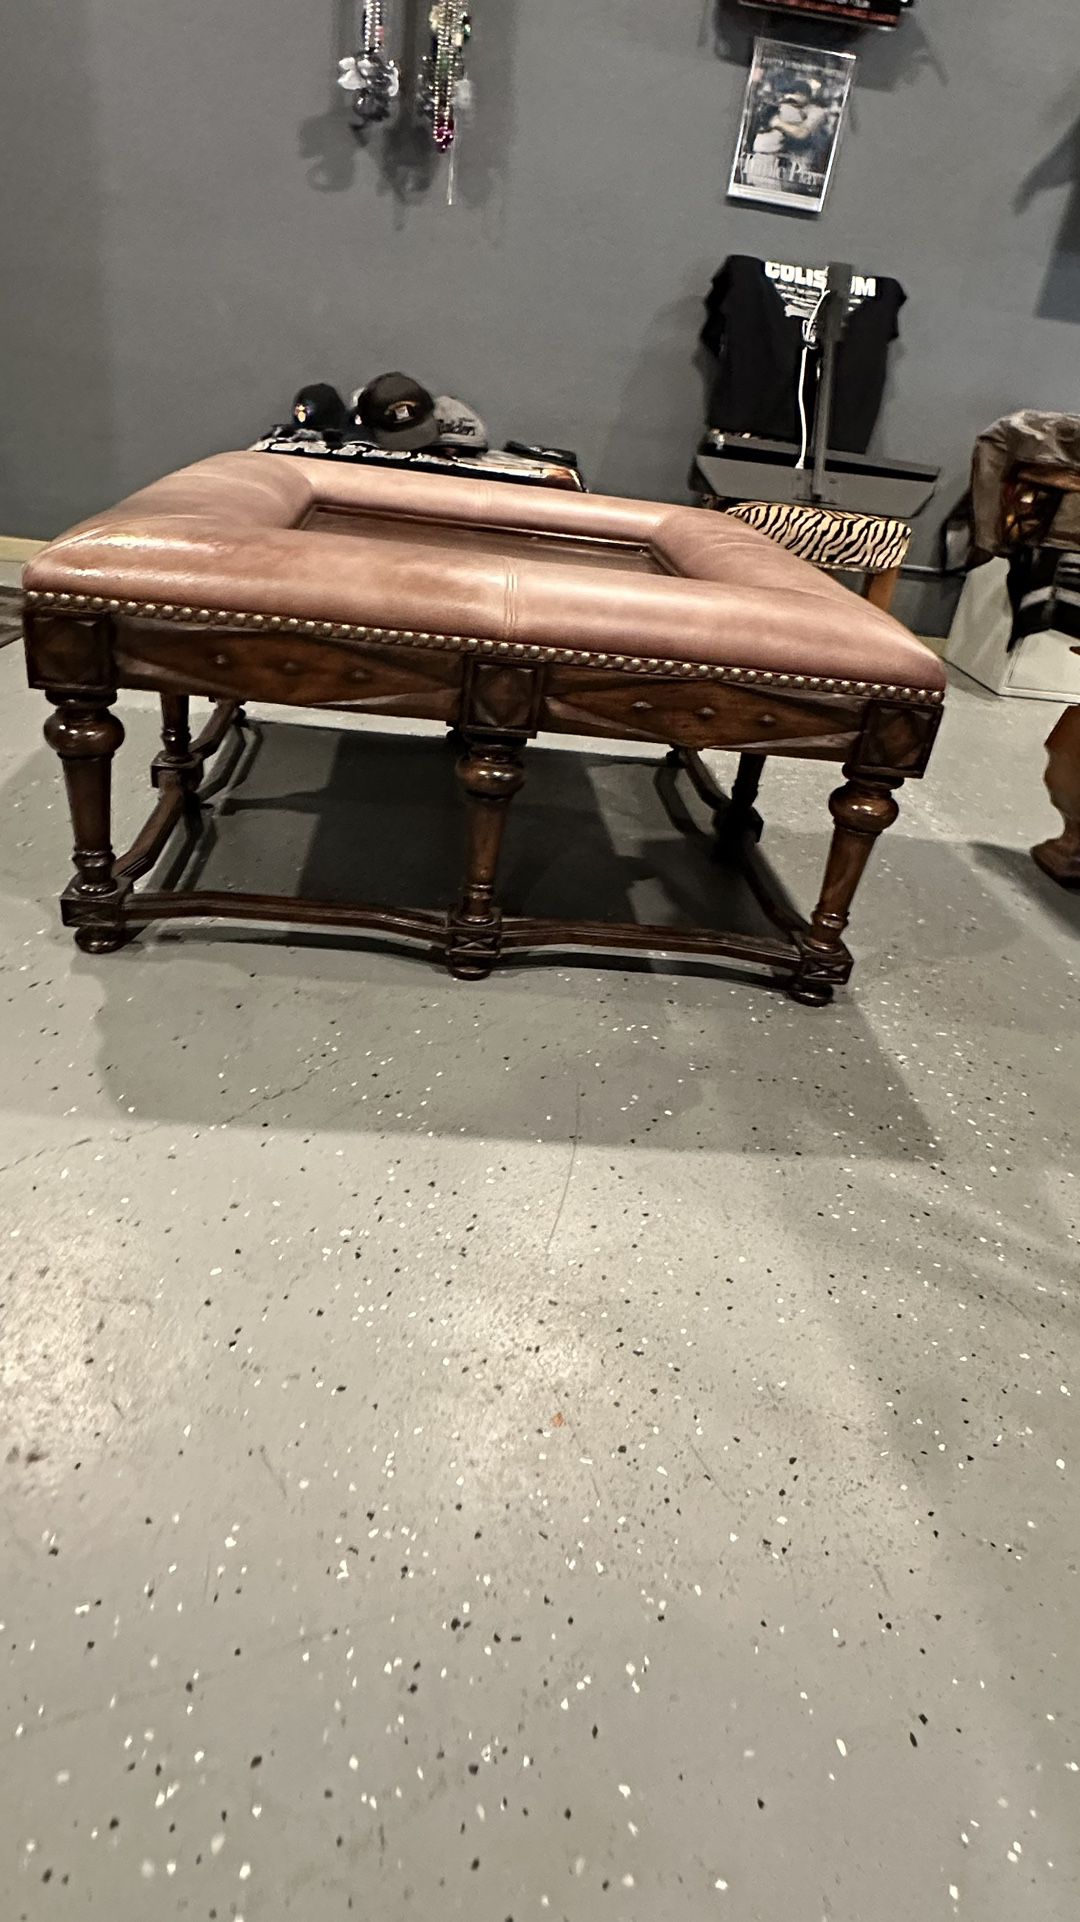 Leather and wood Coffee table